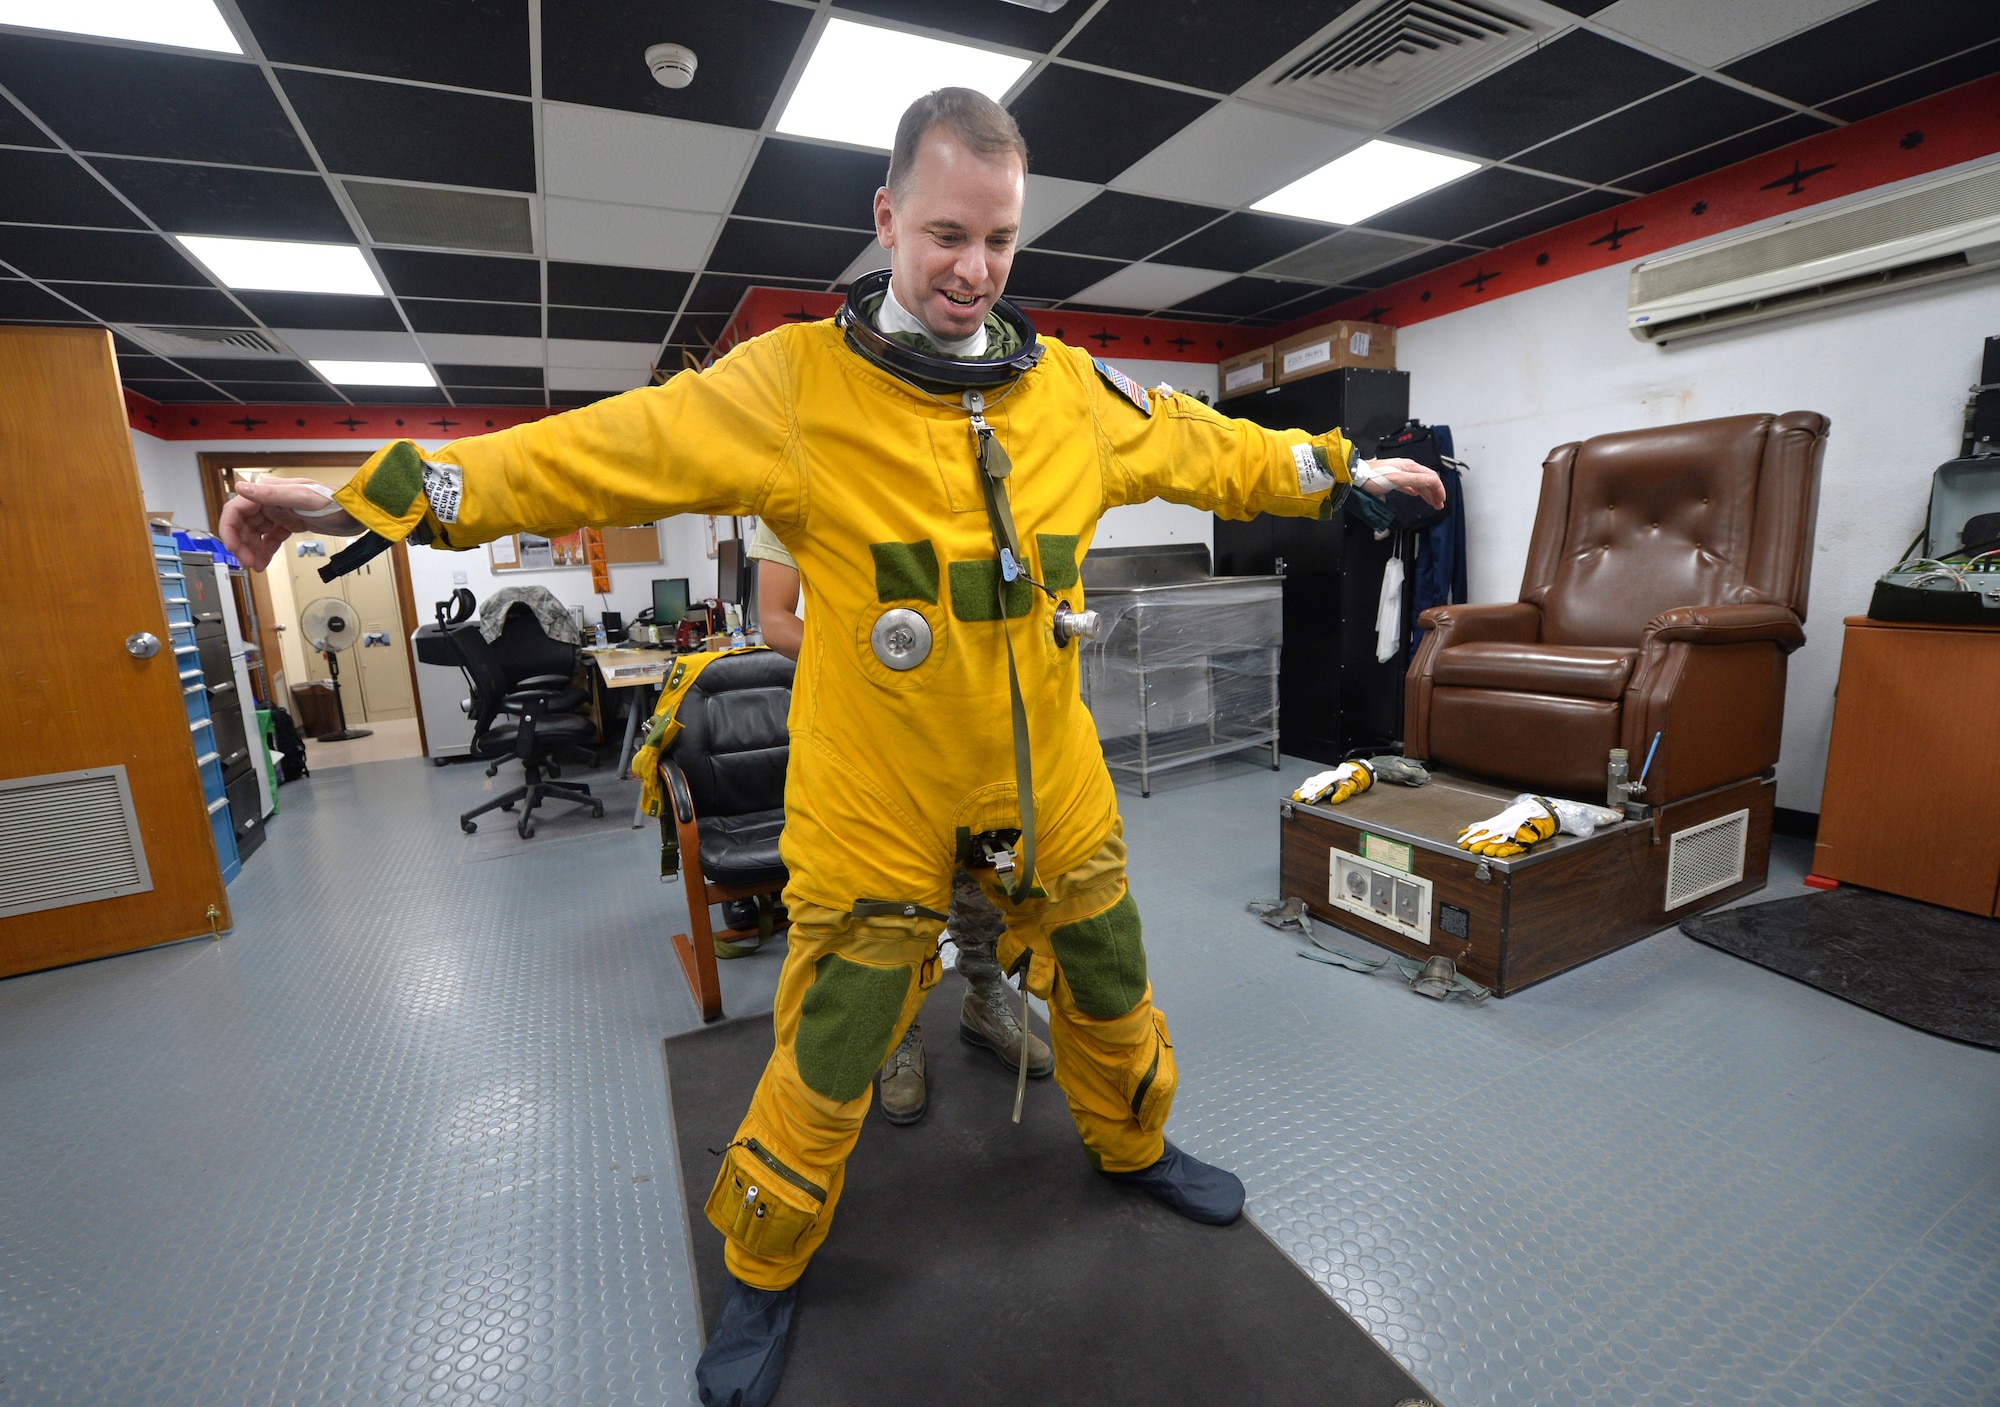 Lt. Col. David, Expeditionary Reconnaissance Squadron U-2 pilot, puts on a full pressure suit at an undisclosed location in Southwest Asia Aug. 7, 2015. U-2 pilots are required to wear the specialized suit due to the high altitudes, typically above 70,000 feet, they fly at. The physiological support detachment team is responsible for maintaining the suit, ensuring it functions properly and assisting pilots with donning the gear. (U.S. Air Force photo/Tech. Sgt. Jeff Andrejcik)